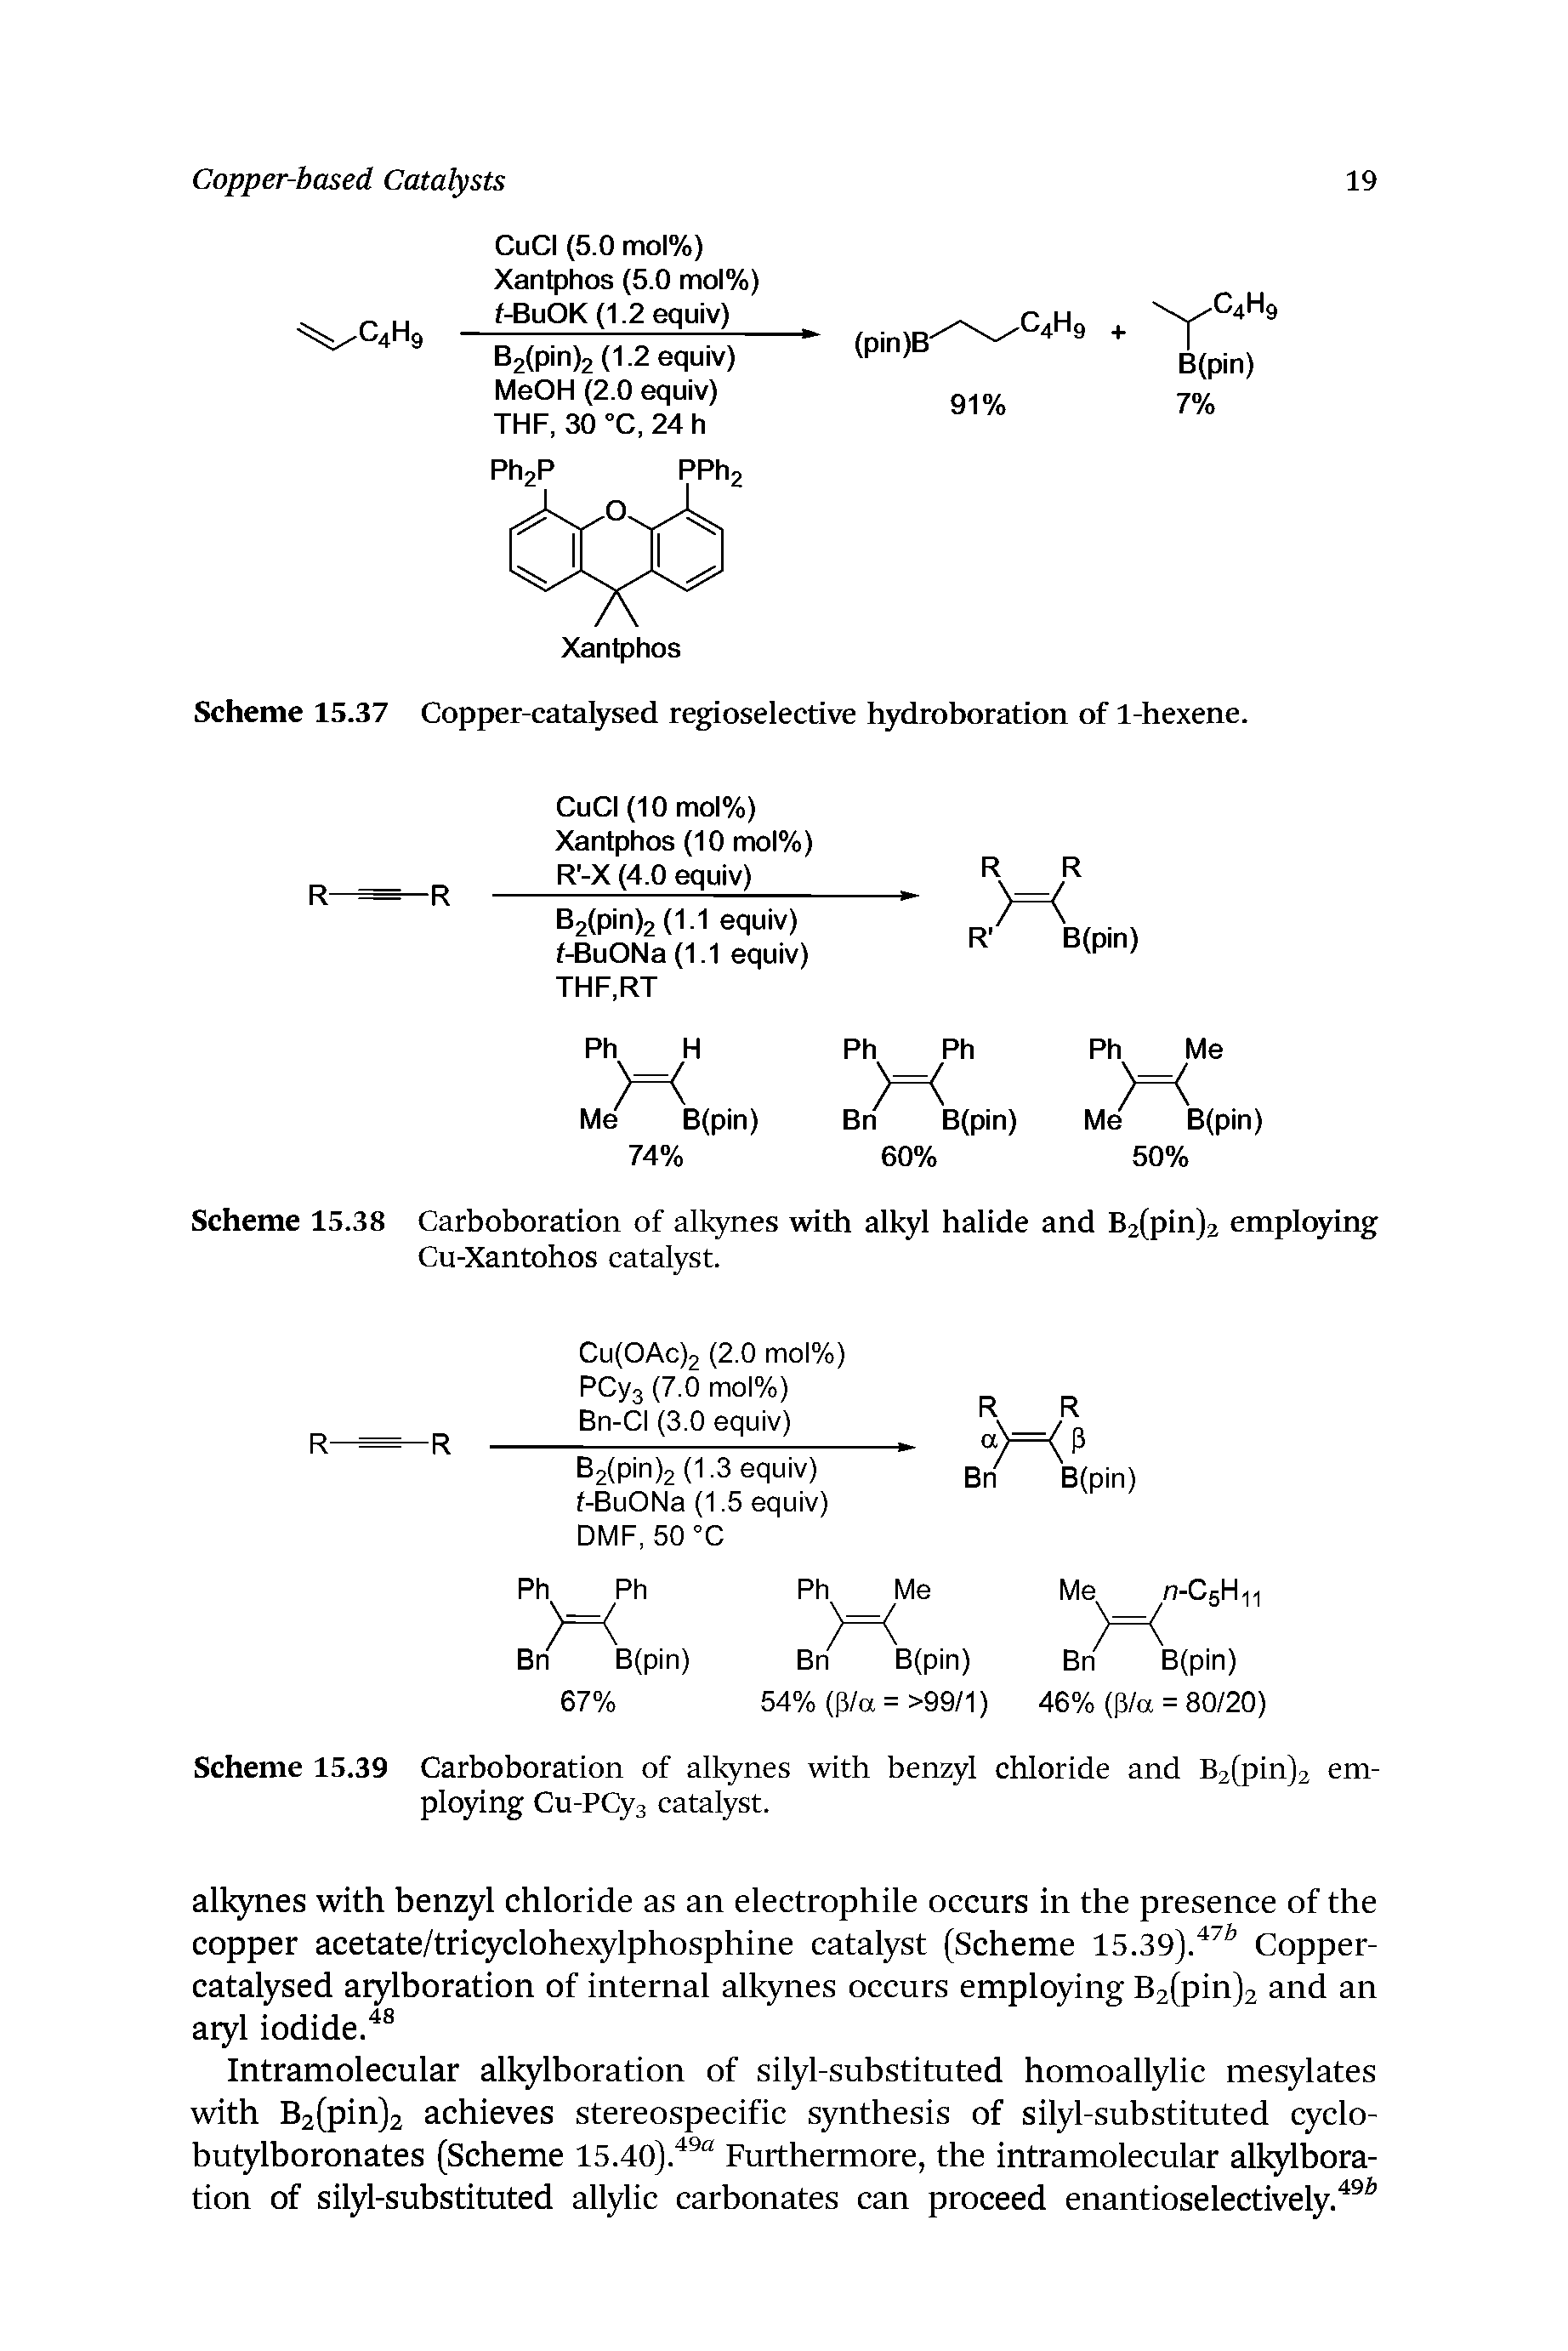 Scheme 15.38 Carboboration of alkynes with alkyl halide and B2(pin)2 emplo5dng Cu-Xantohos catalyst.